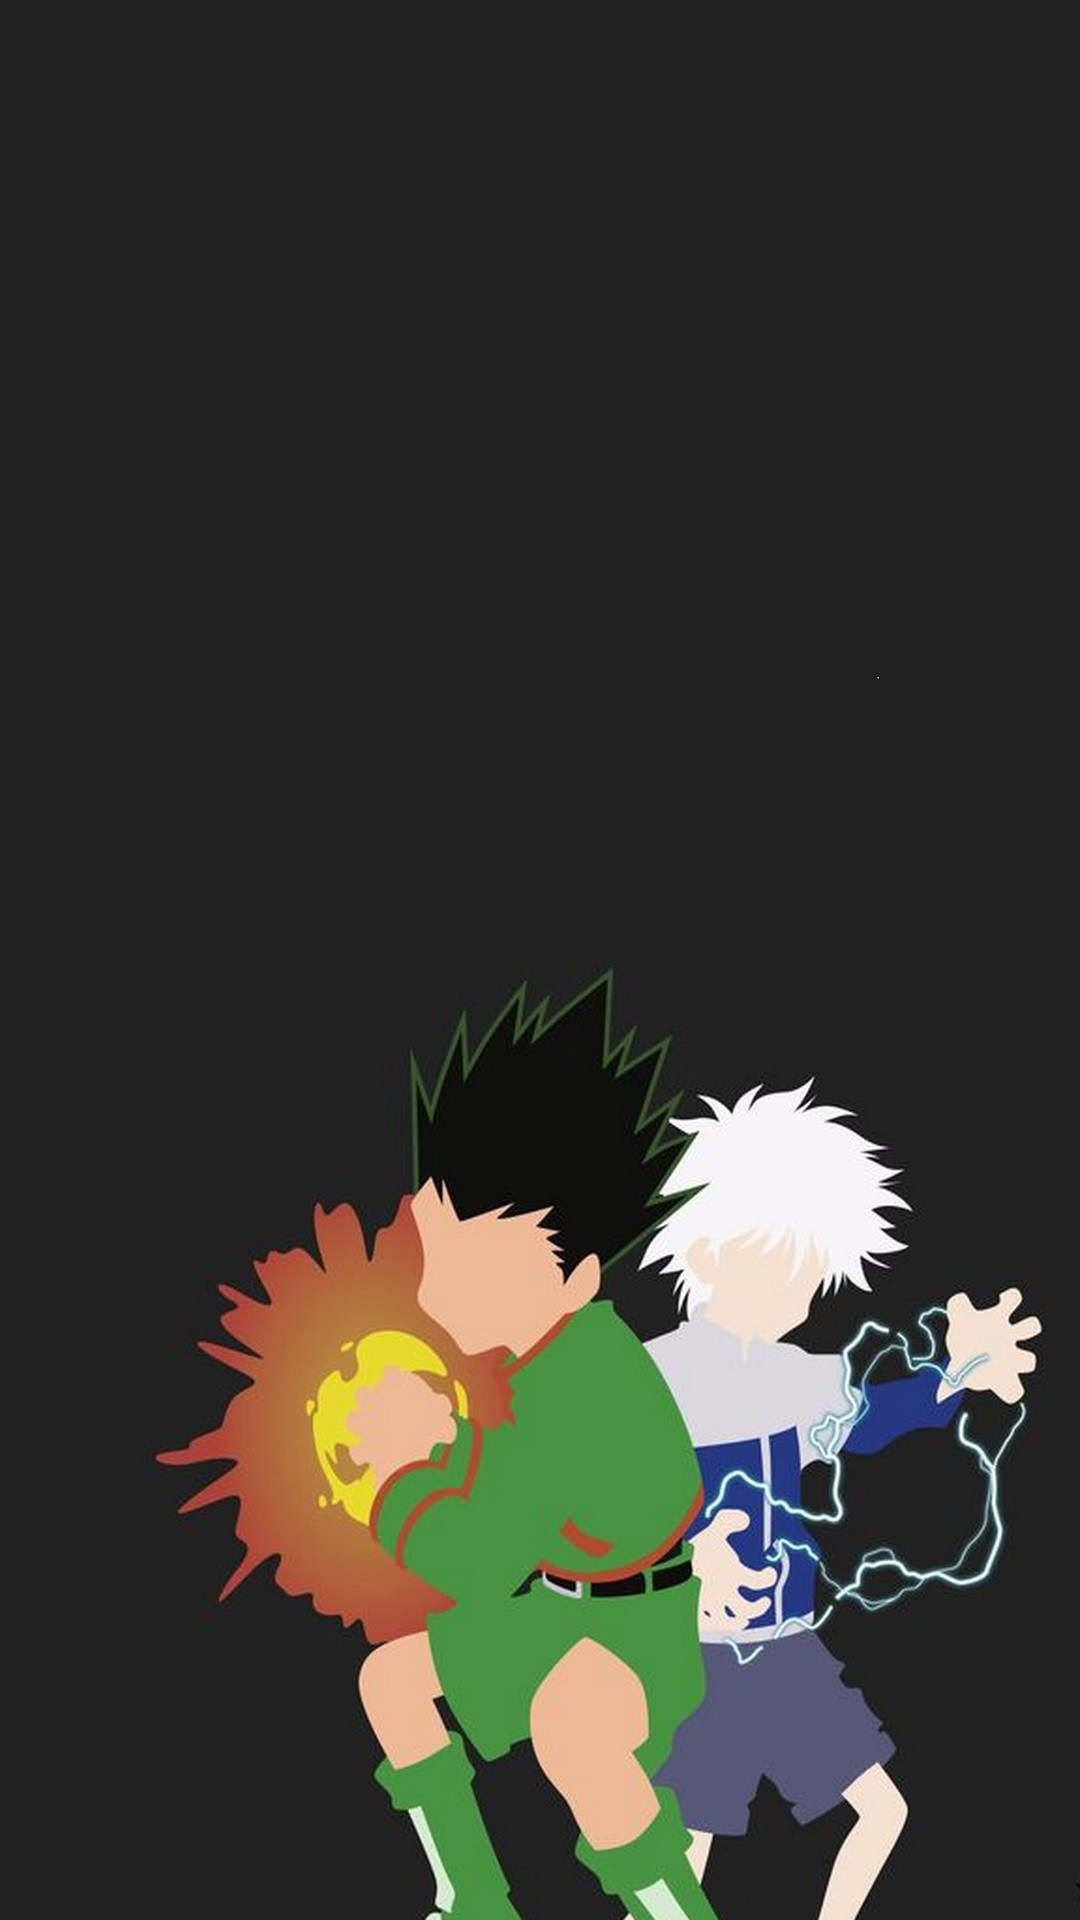 Wallpaper Gon And Killua Android with high-resolution 1080x1920 pixel. You can use this wallpaper for your Android backgrounds, Tablet, Samsung Screensavers, Mobile Phone Lock Screen and another Smartphones device